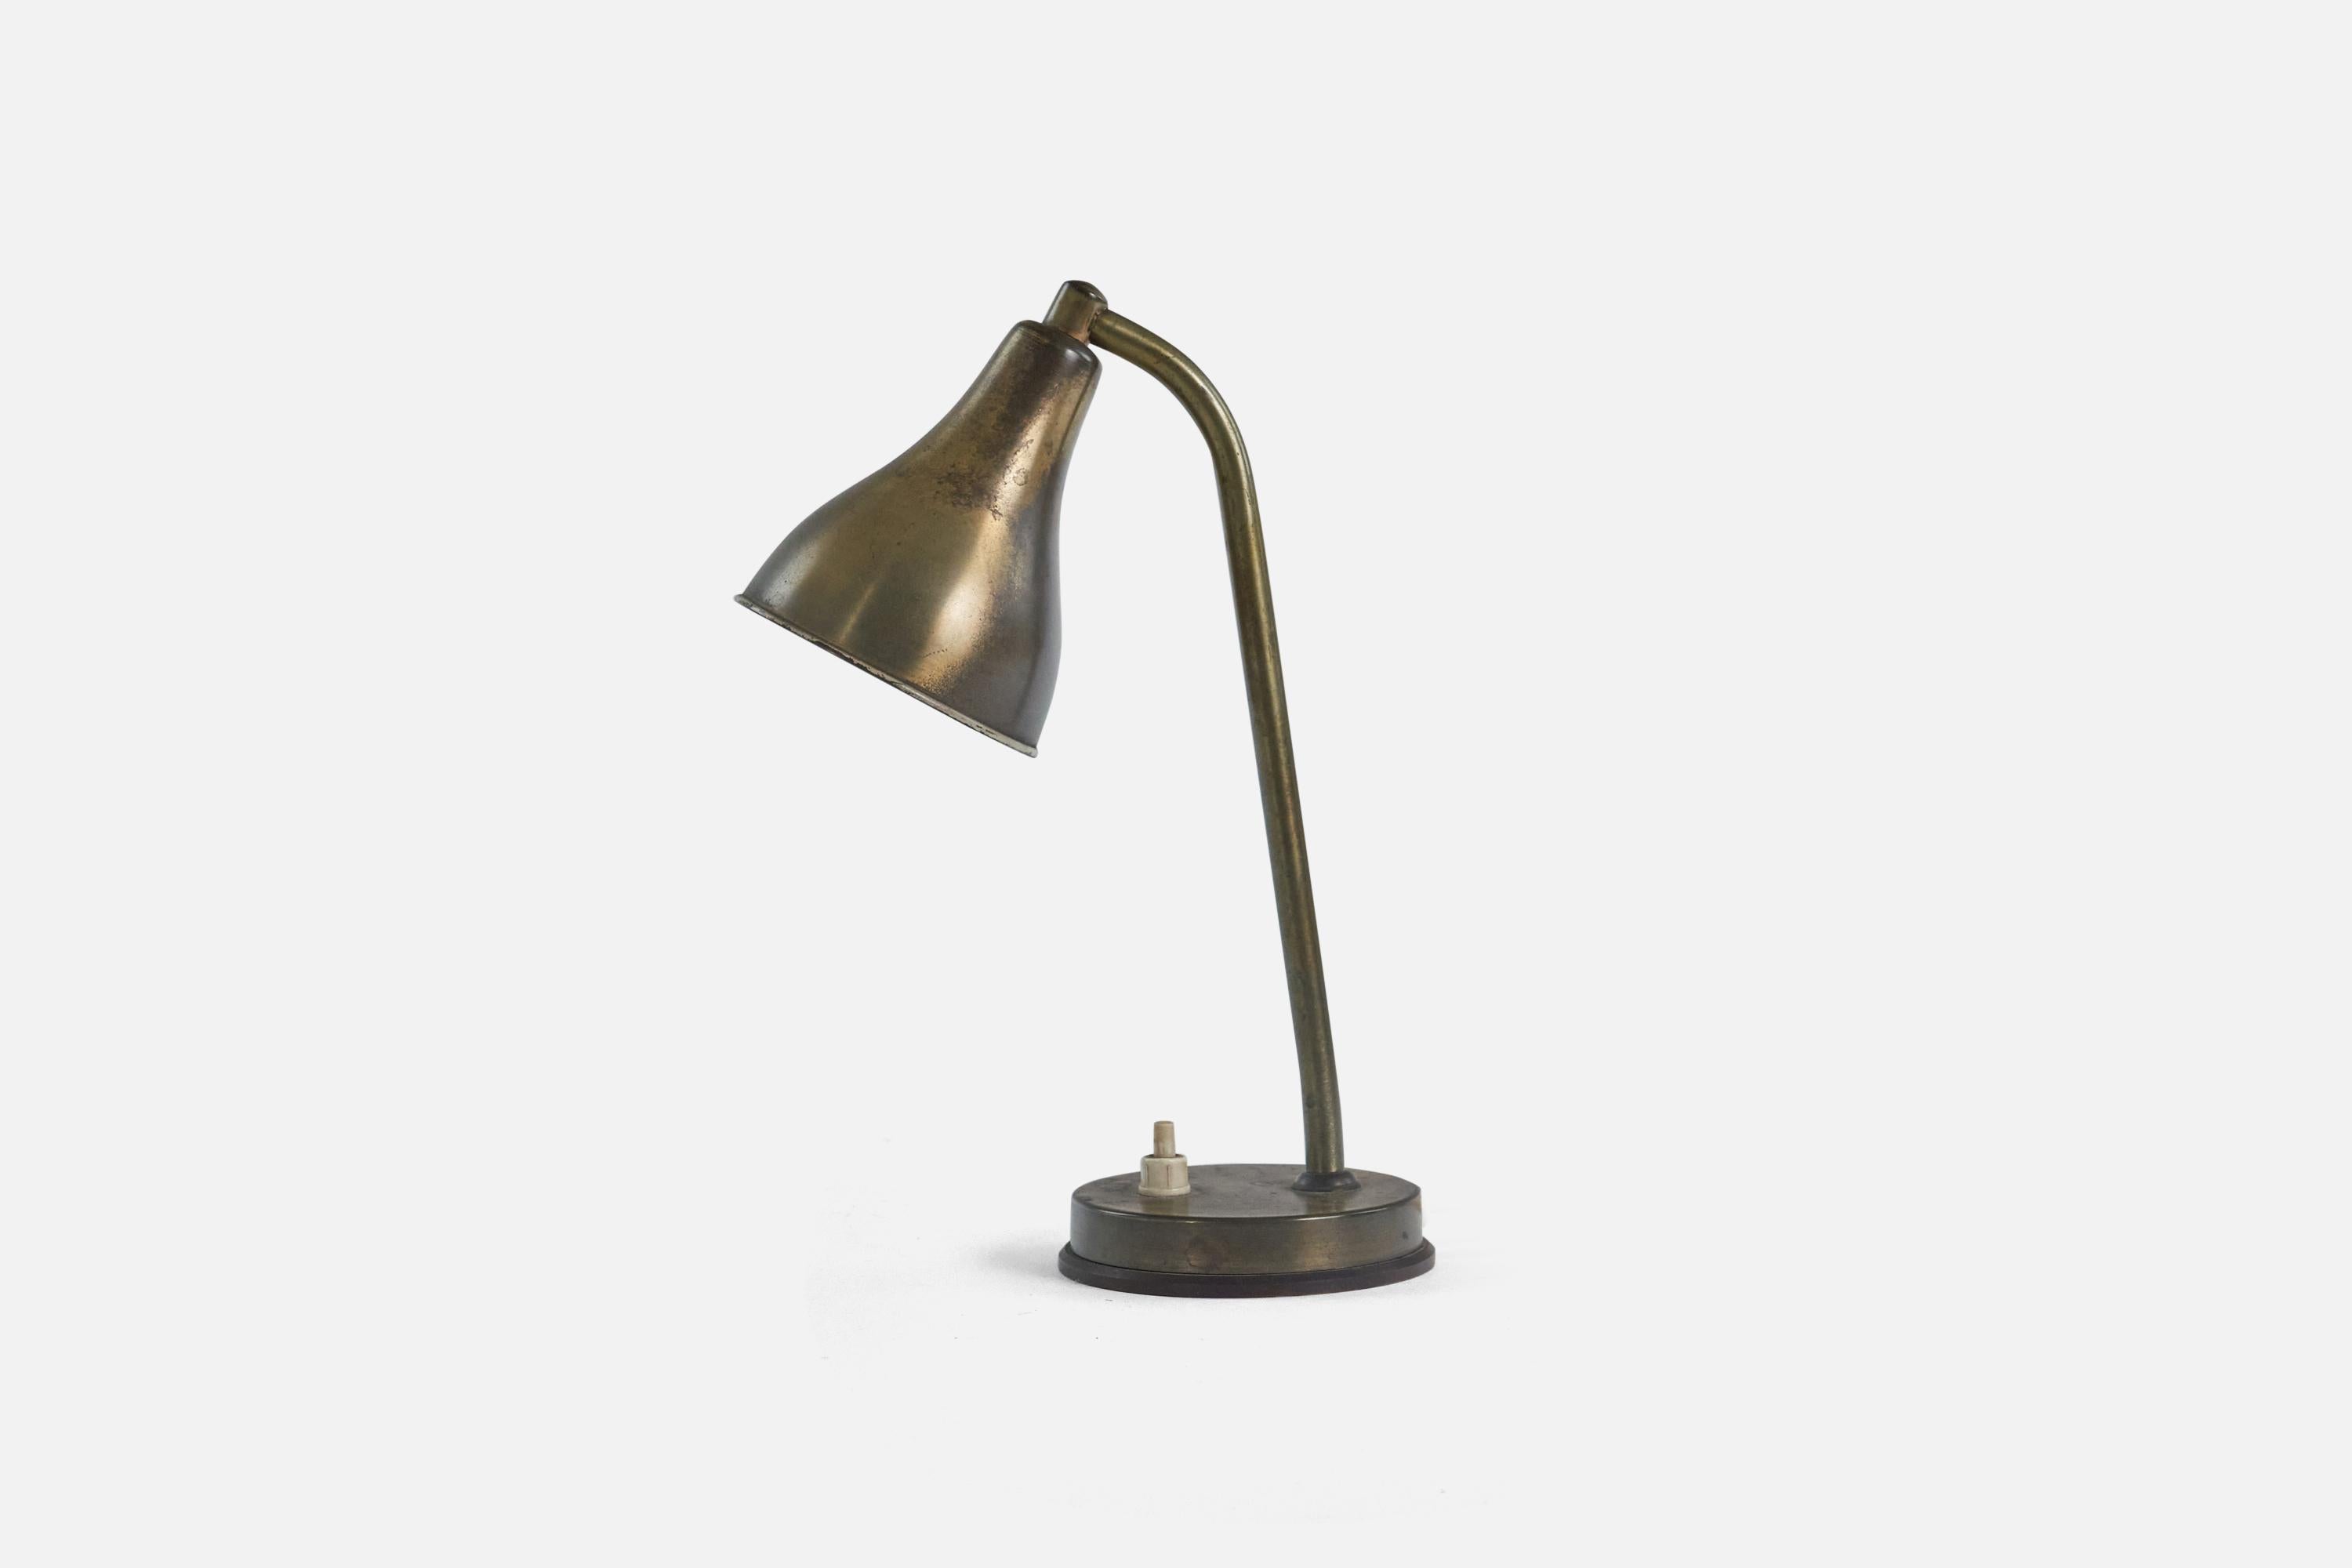 A brass desk lamp designed and produced in Sweden, c. 1940s. 

Socket takes E-14 bulb.
There is no maximum wattage stated on the fixture.